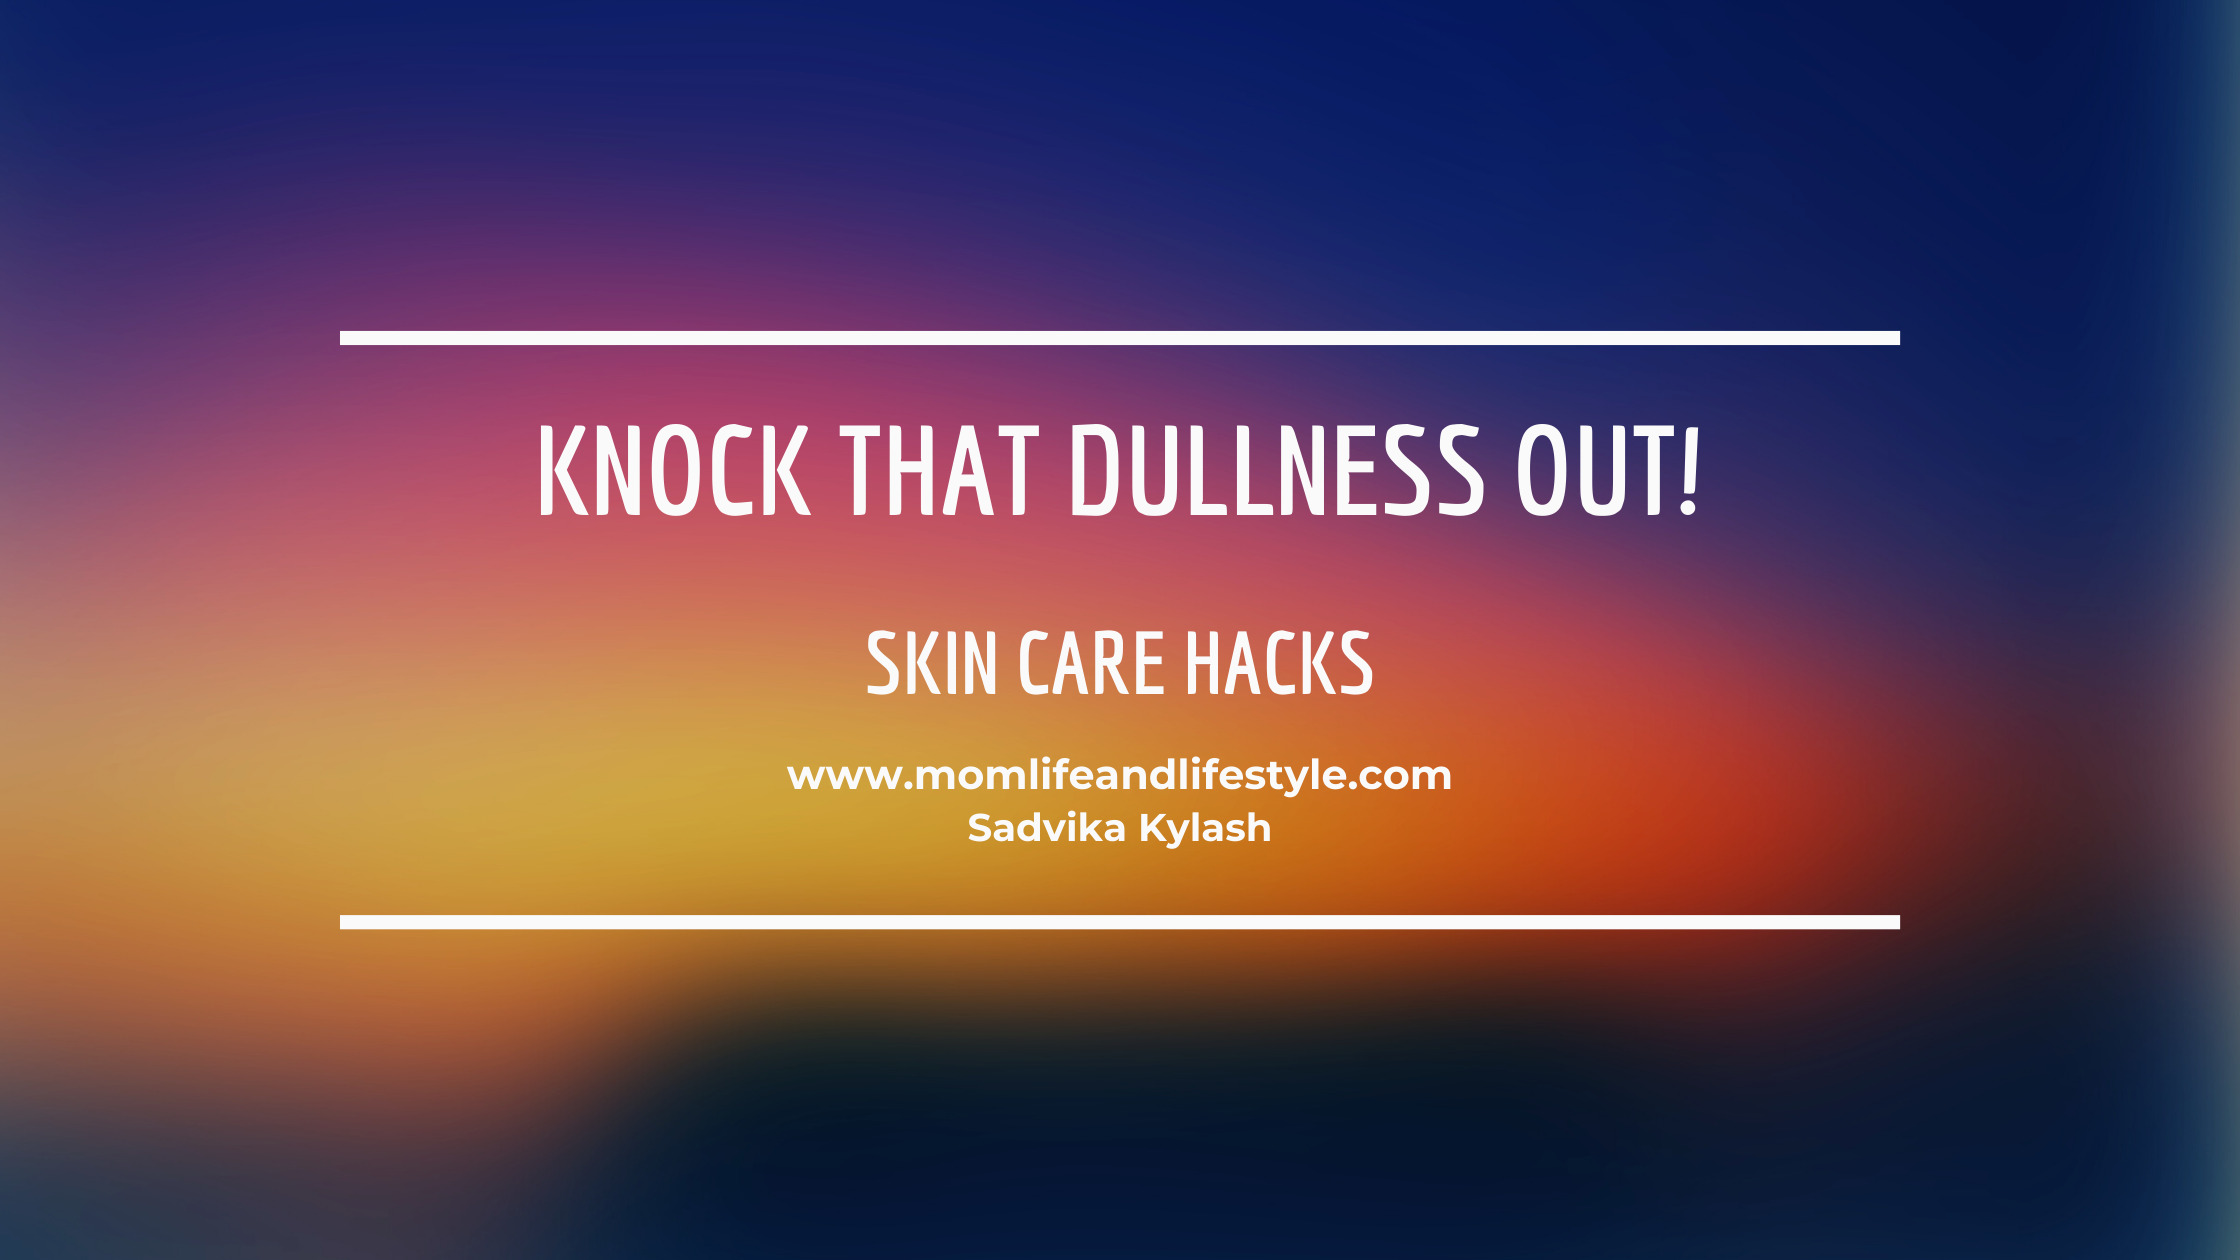 Knock that dullness out!